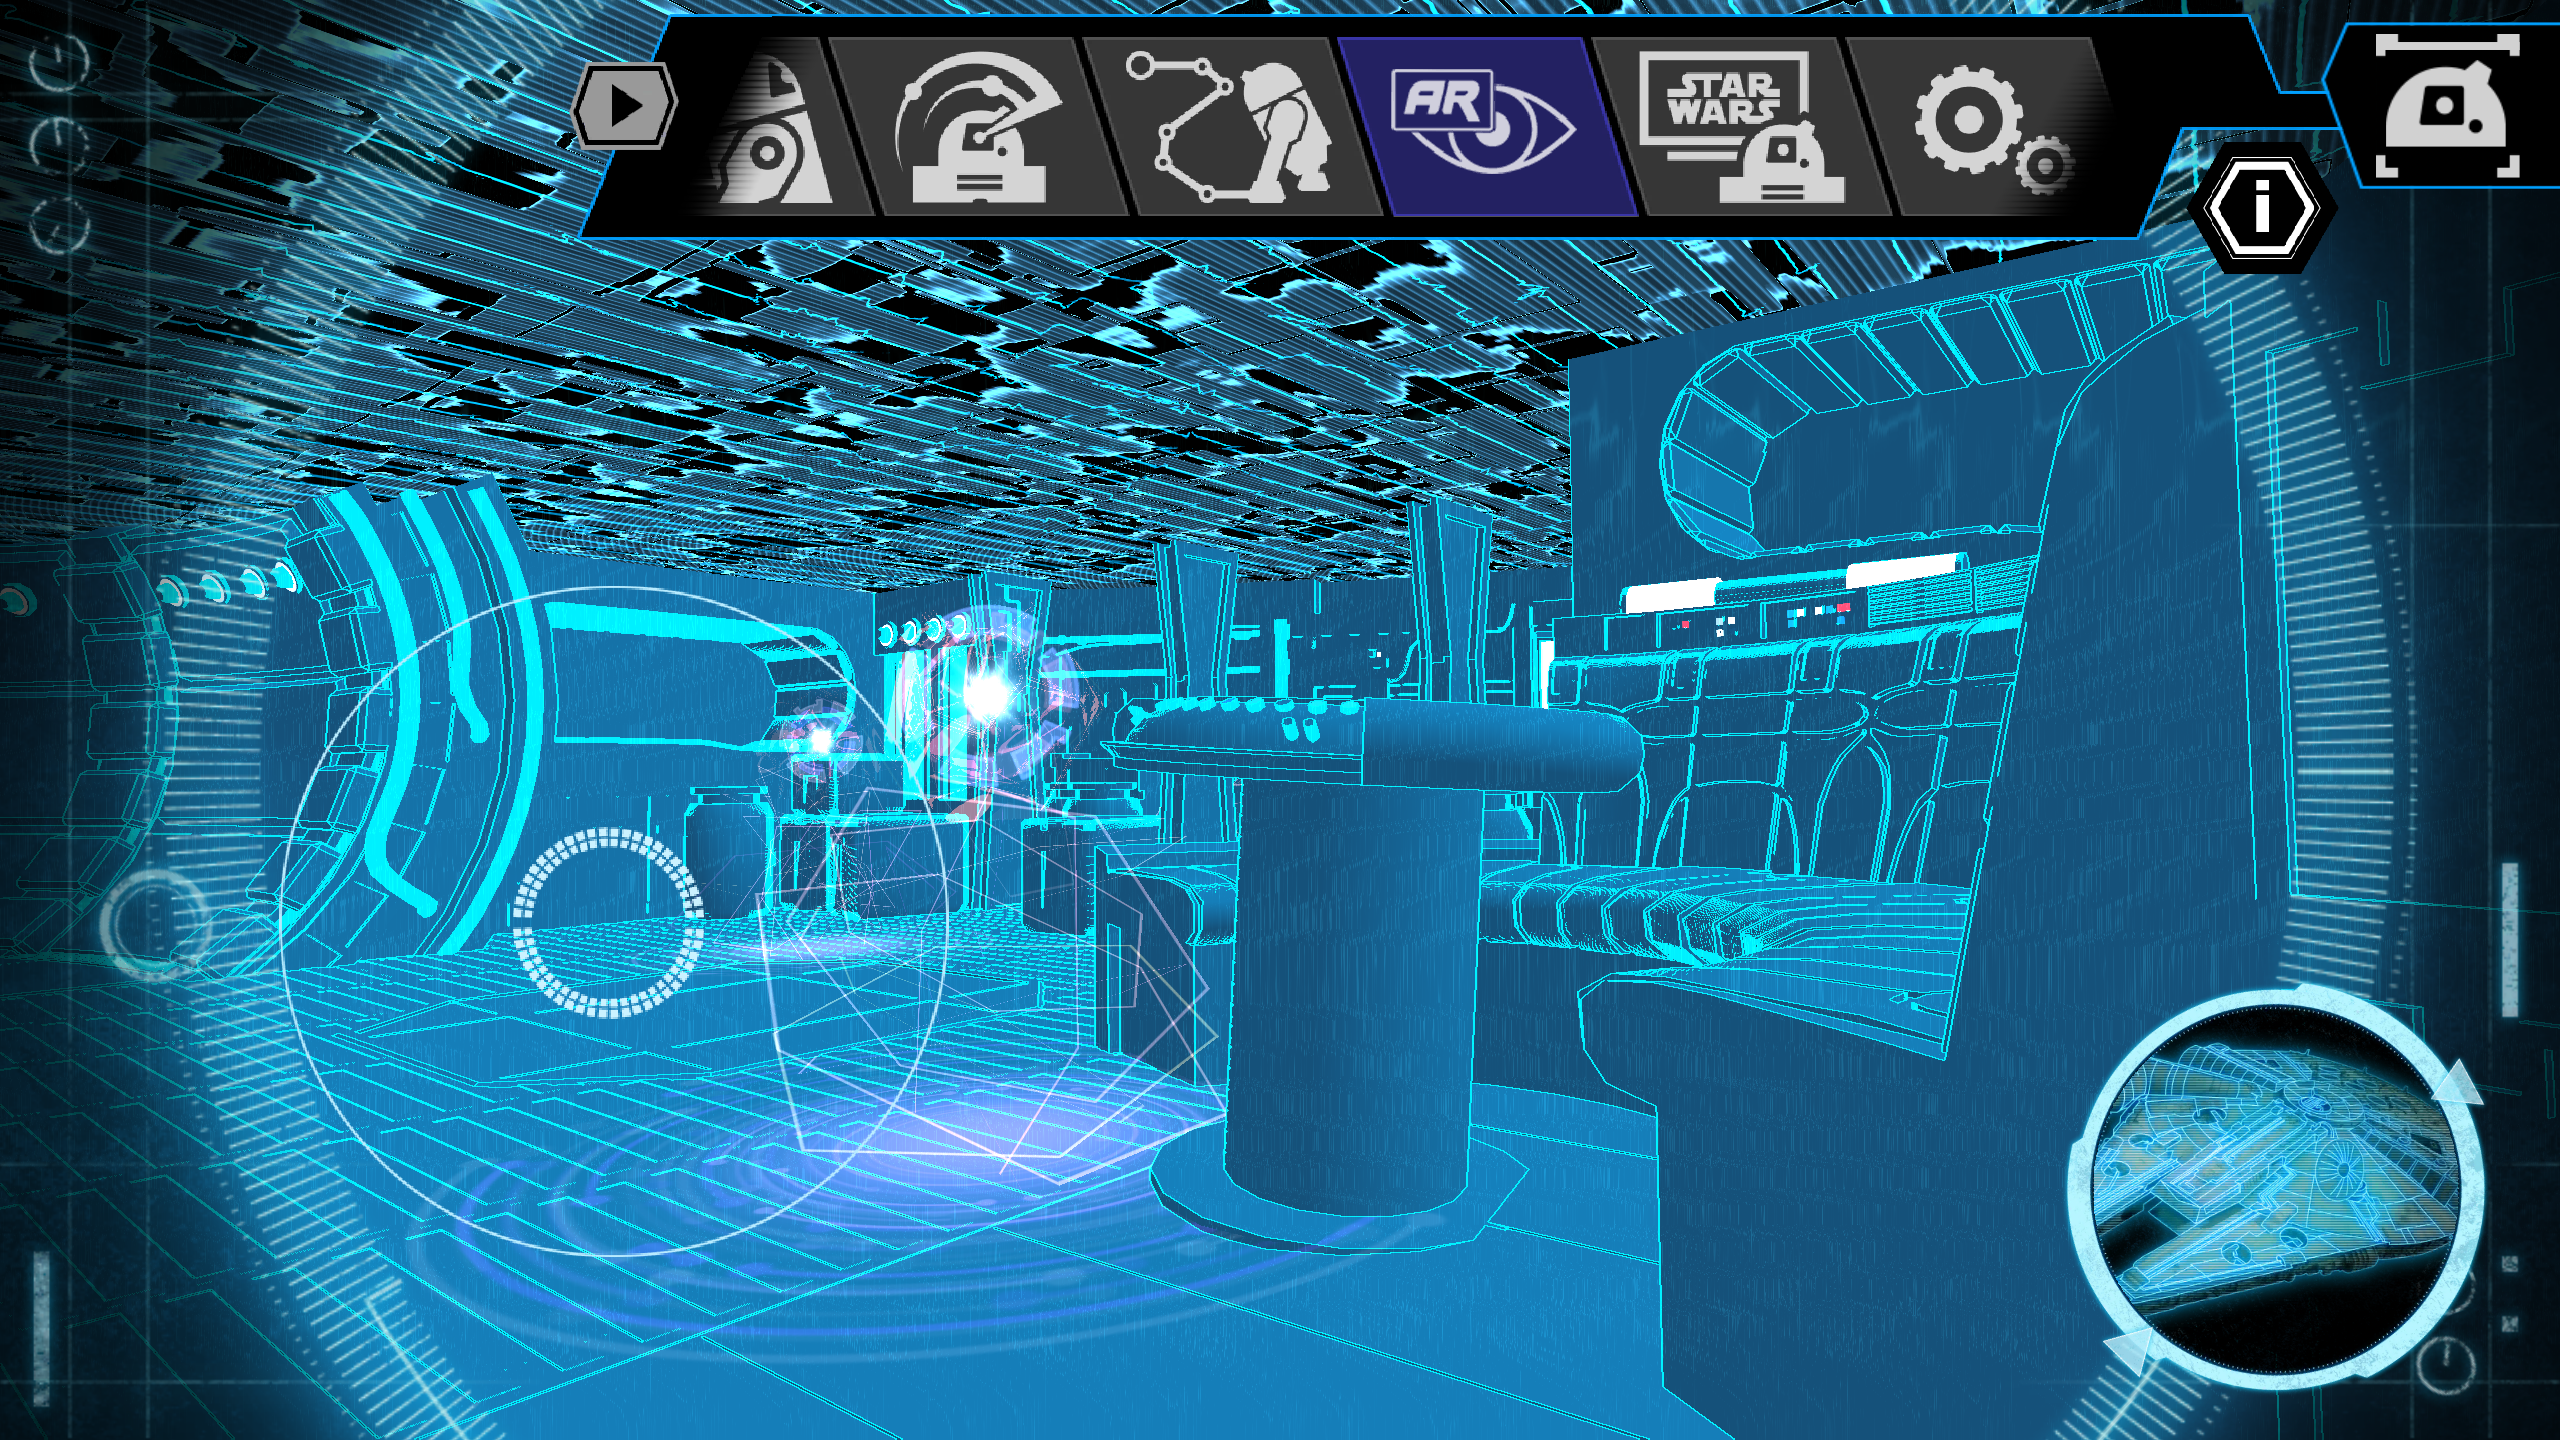 Sphero R2-D2 app interface with augmented reality view.